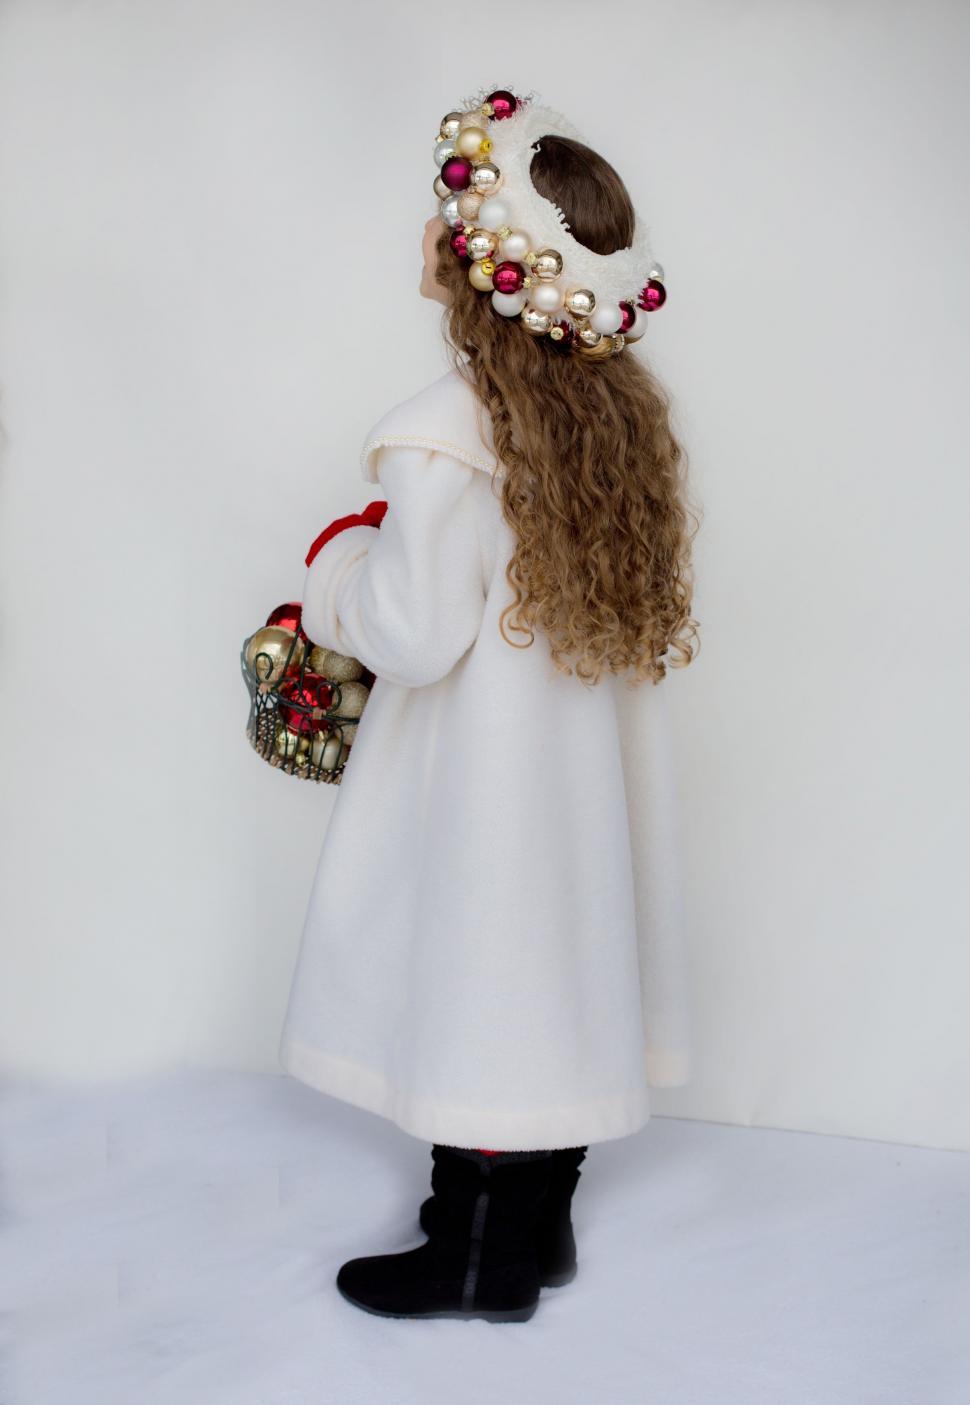 Free Image of Little girl in pearl headband and Christmas balls 